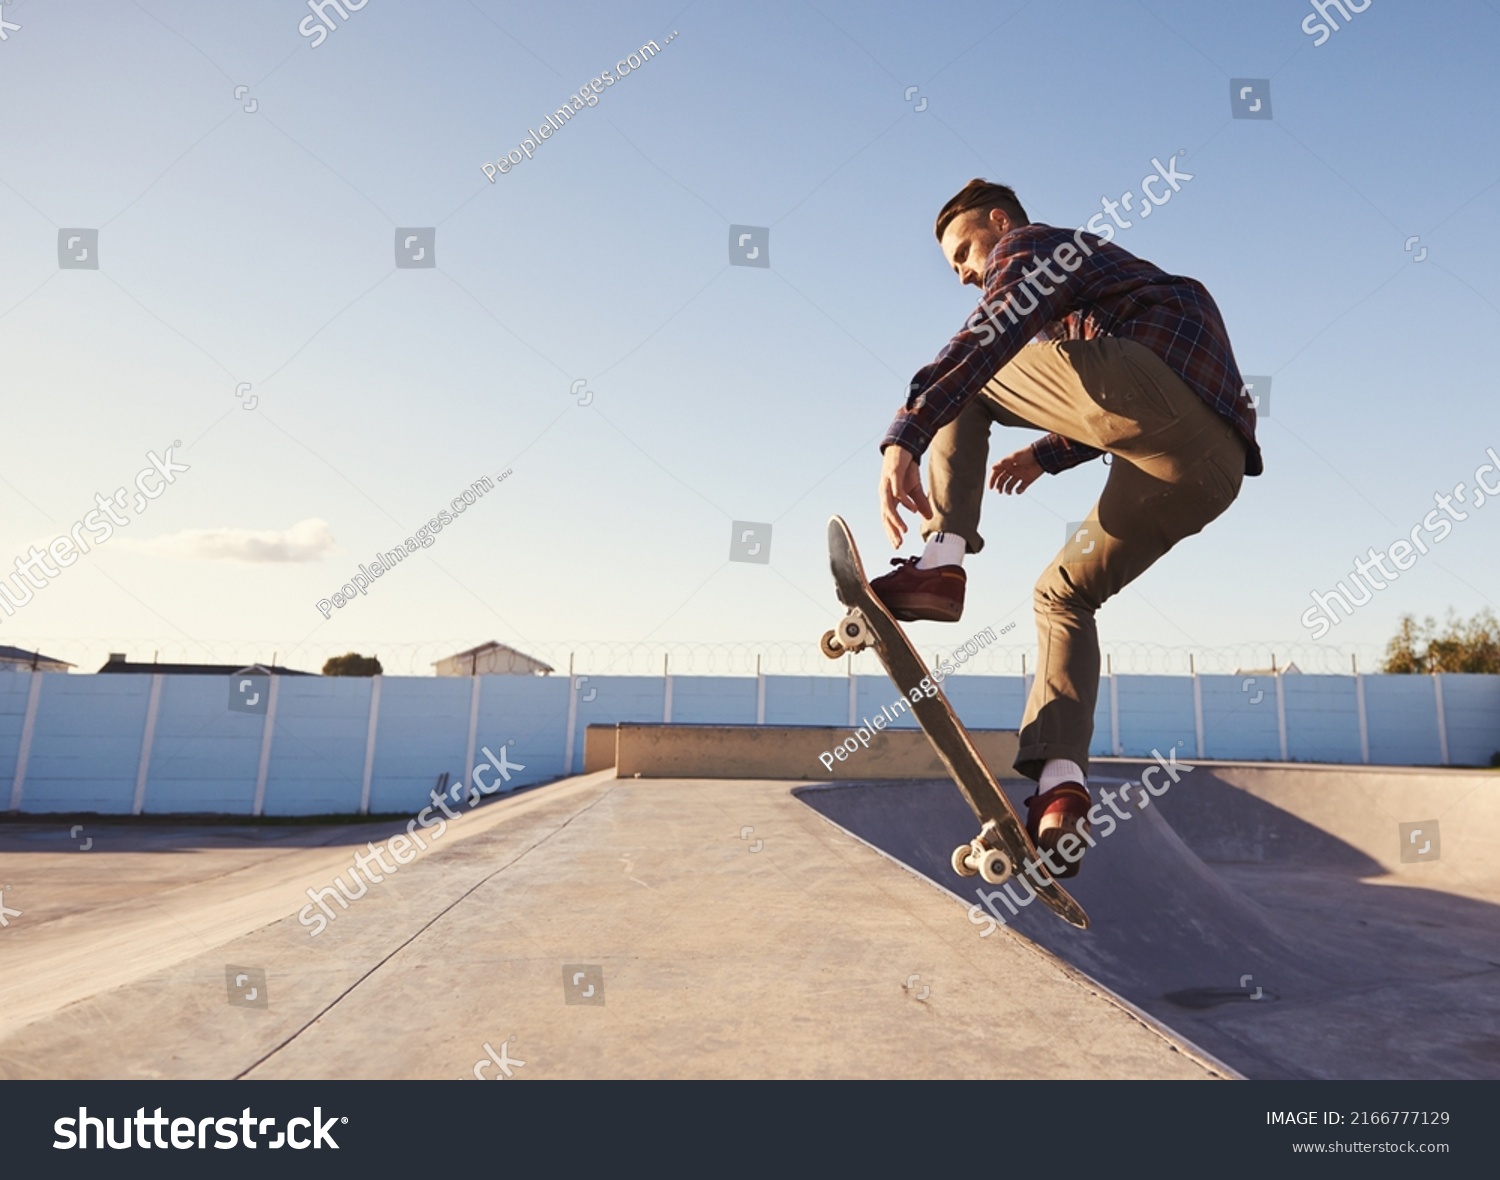 A rad day at the skate park. A young man doing tricks on his skateboard at the skate park. #2166777129